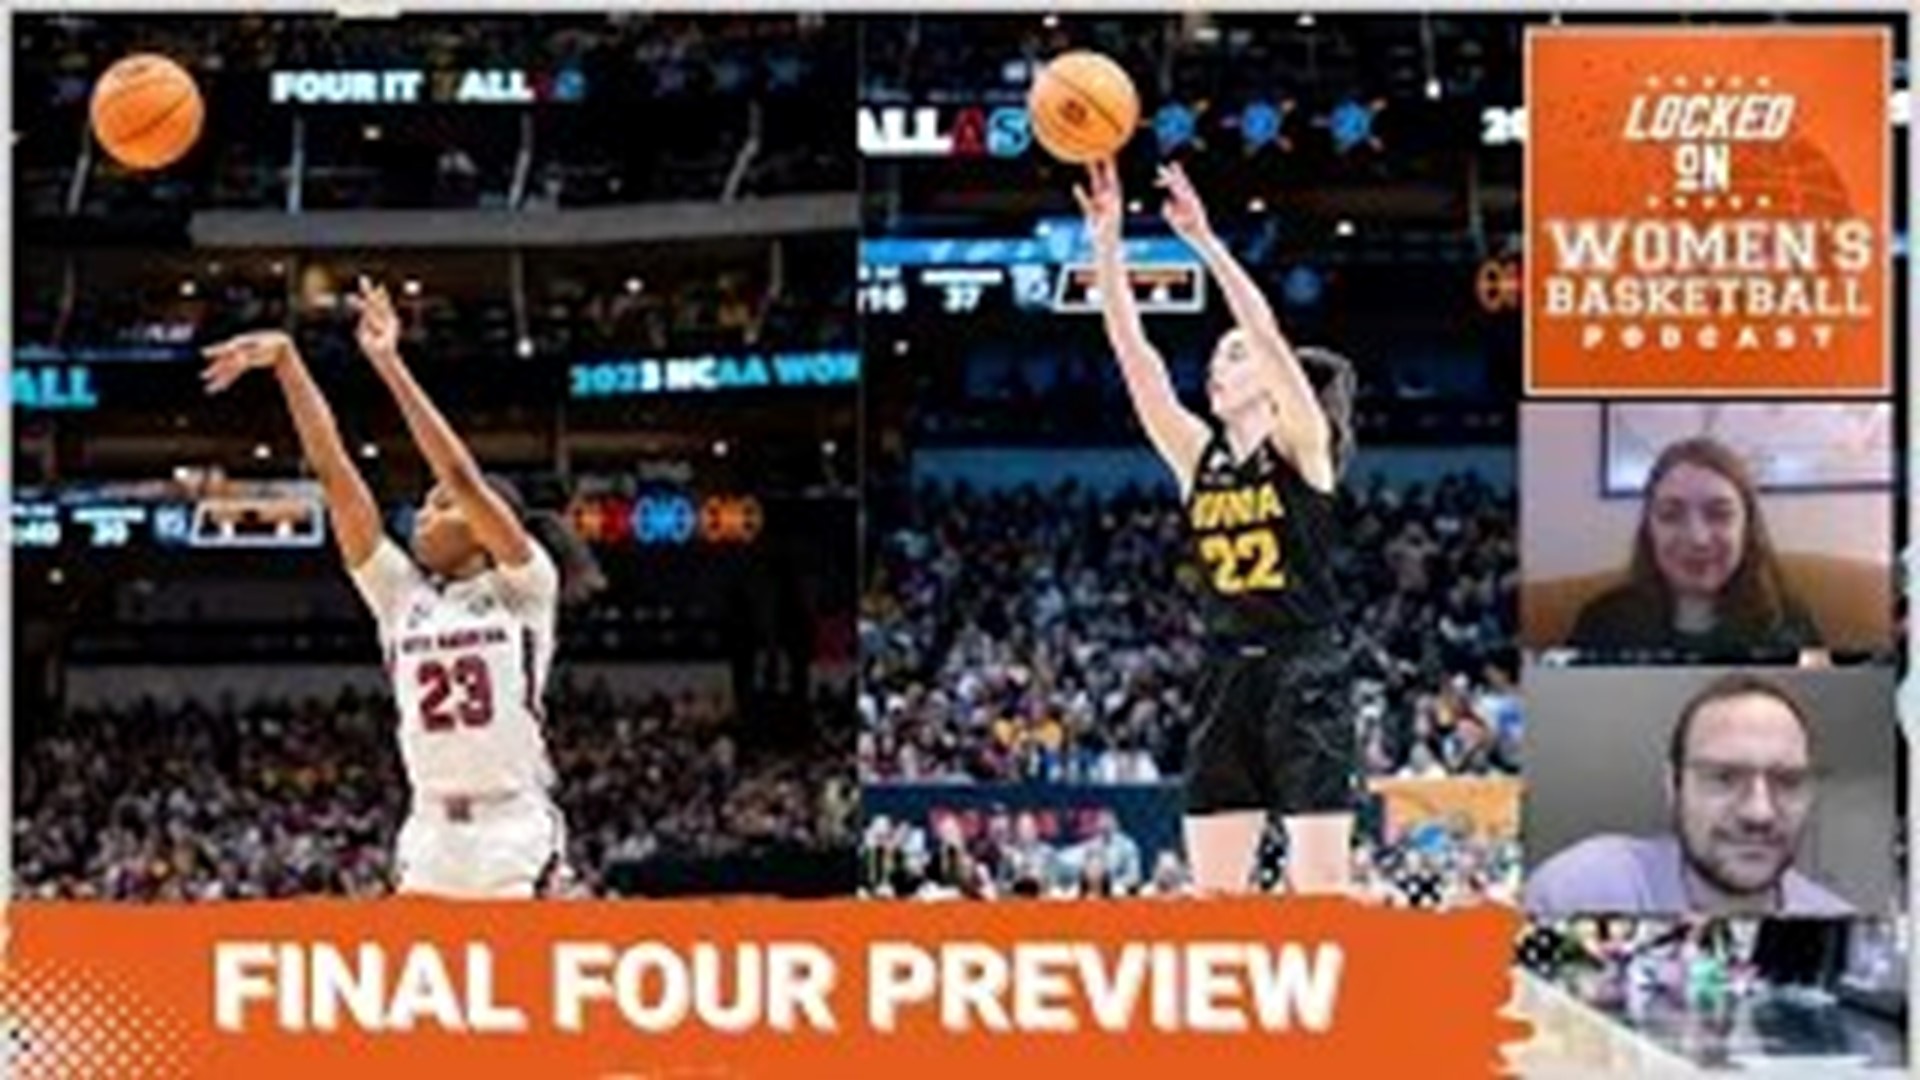 With the Final Four just hours away, The Next’s BIG EAST writer Tee Baker joins host Natalie Heavren to break down both matchups.